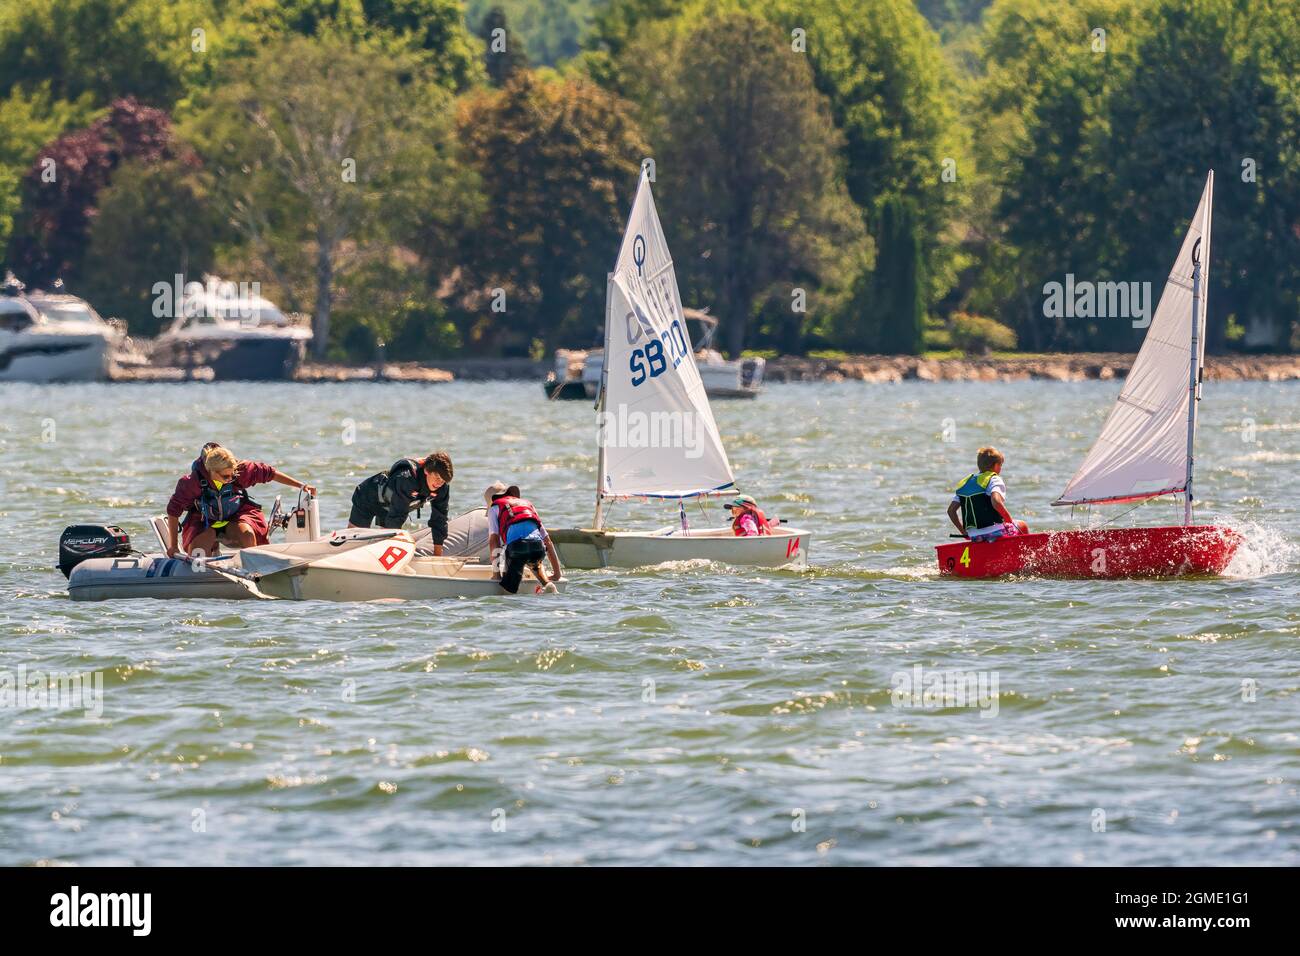 The sail training foundation holds youth sail training classes Fridays from May through October, in the channel between Lake Michigan and Green Bay. Stock Photo